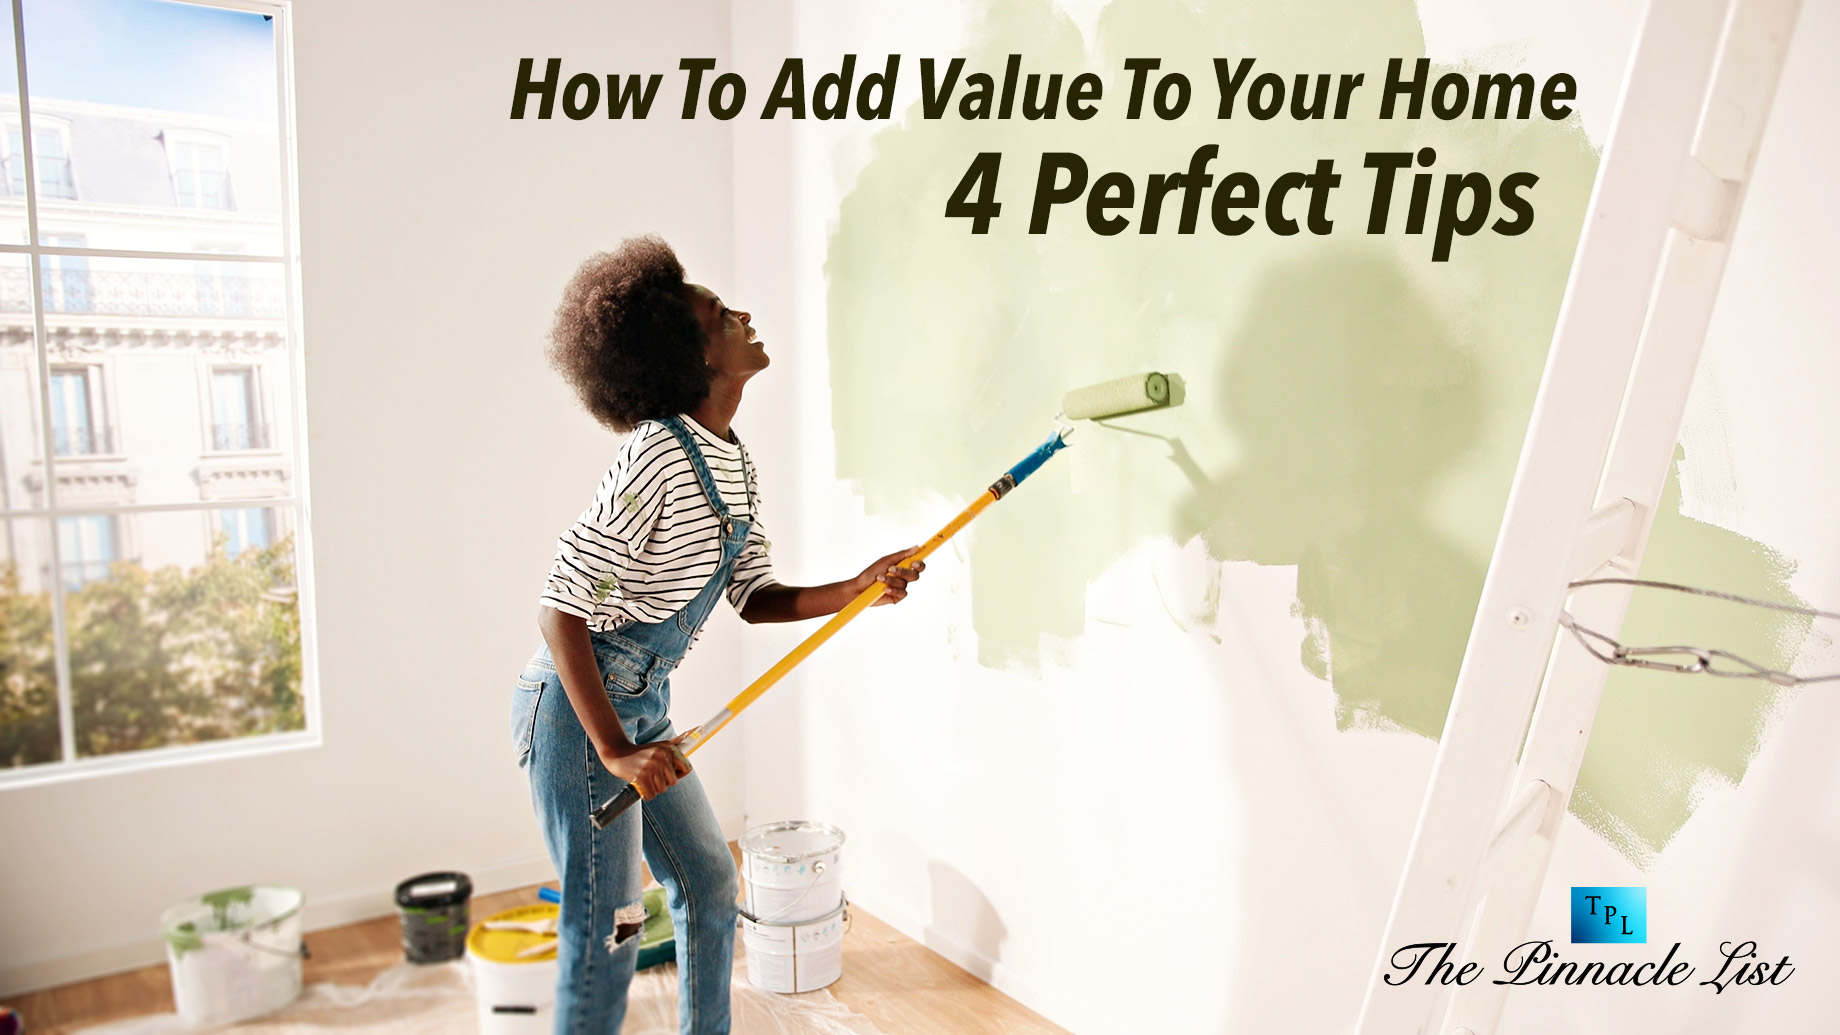 How To Add Value To Your Home - 4 Perfect Tips